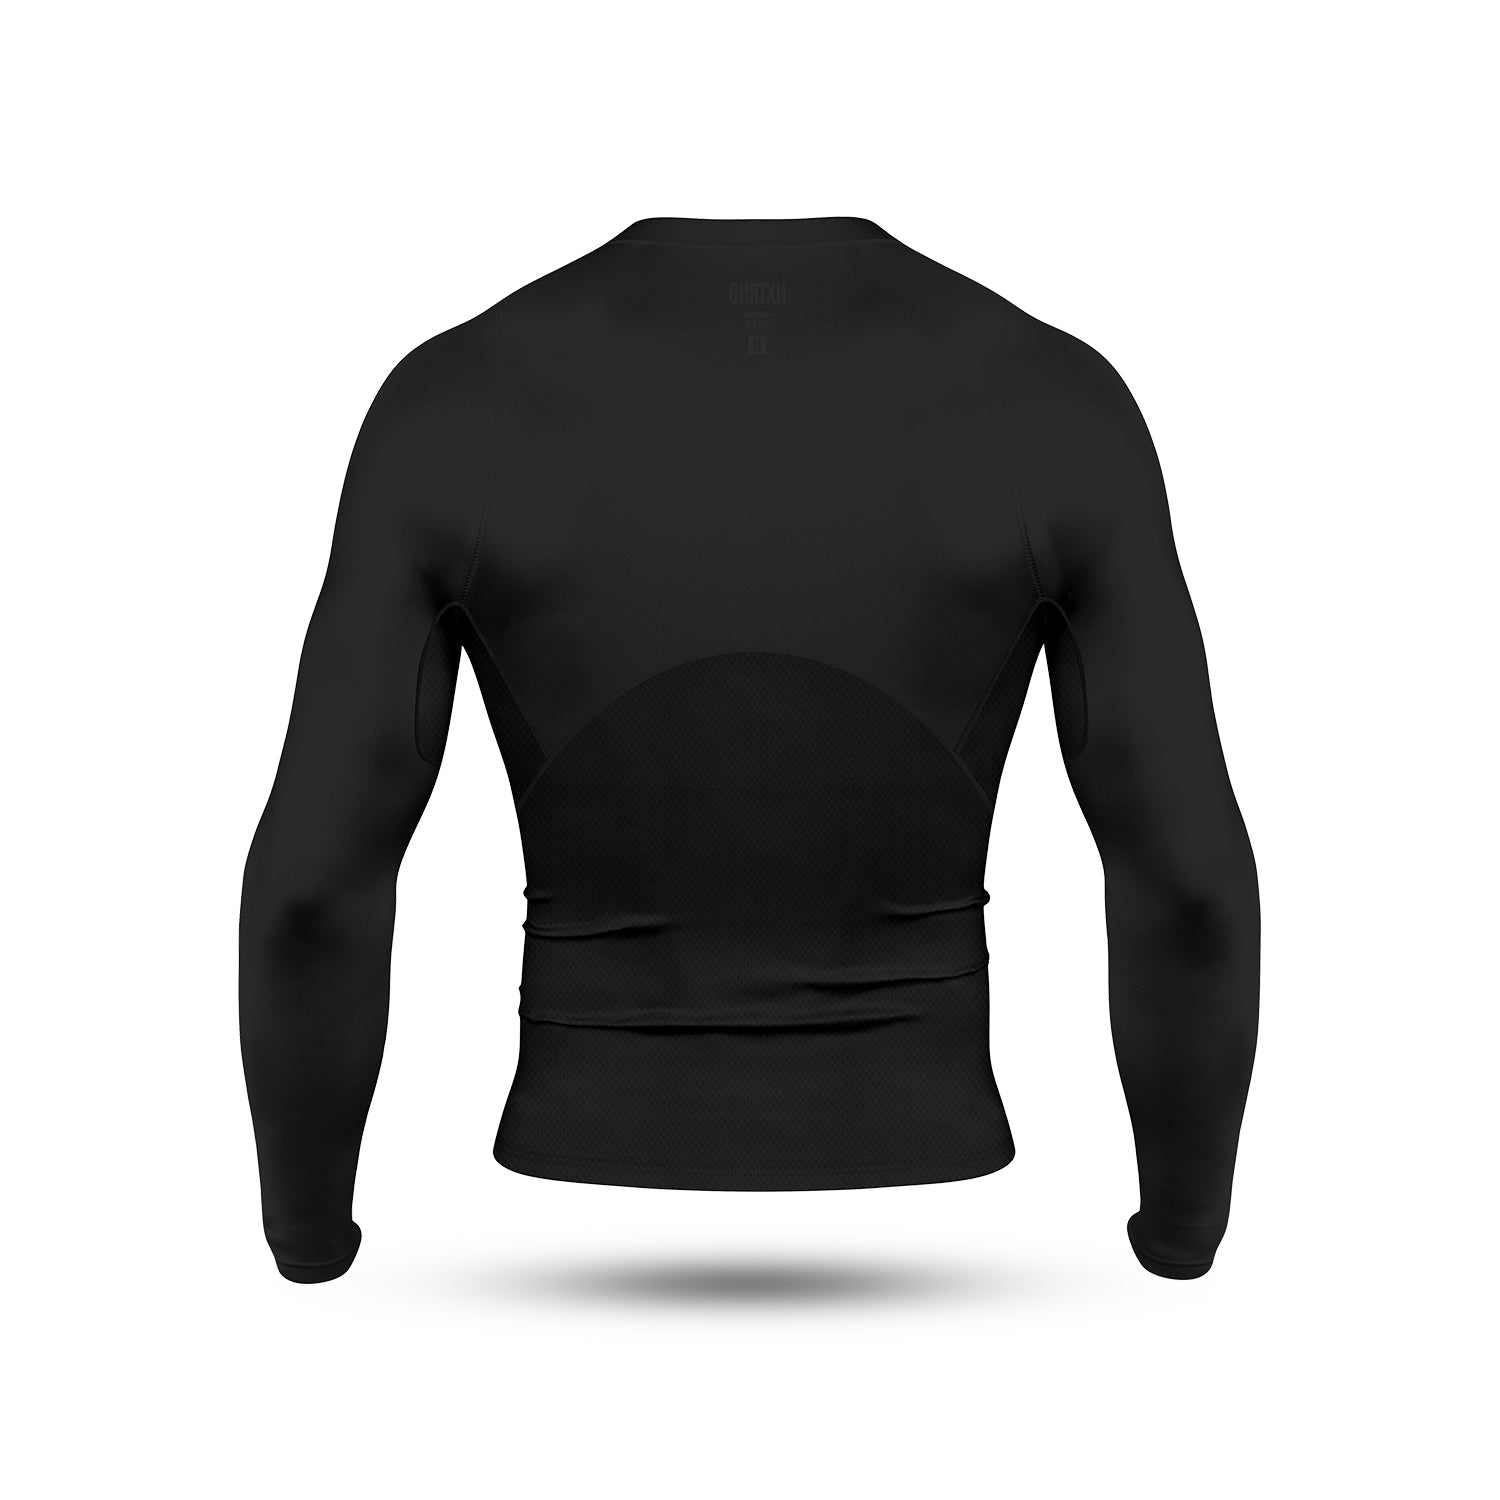 Nxtrnd Core Compression Long Sleeve Black